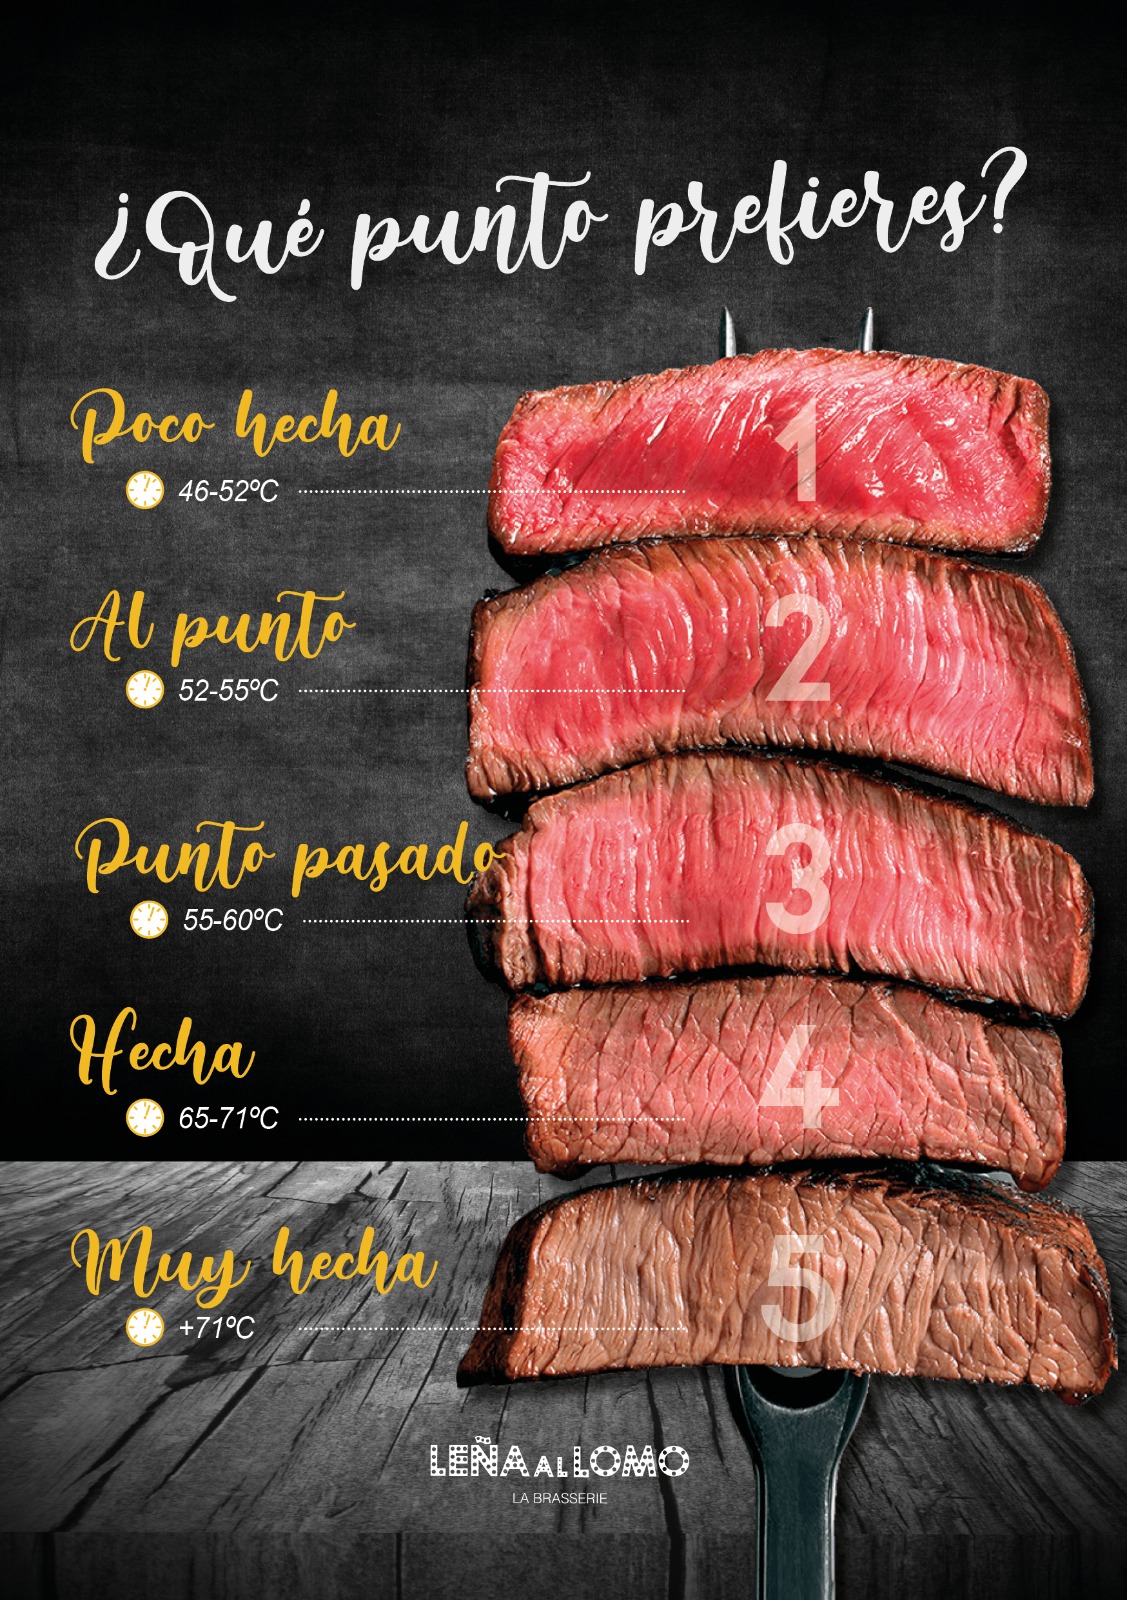 How would you like your steak?